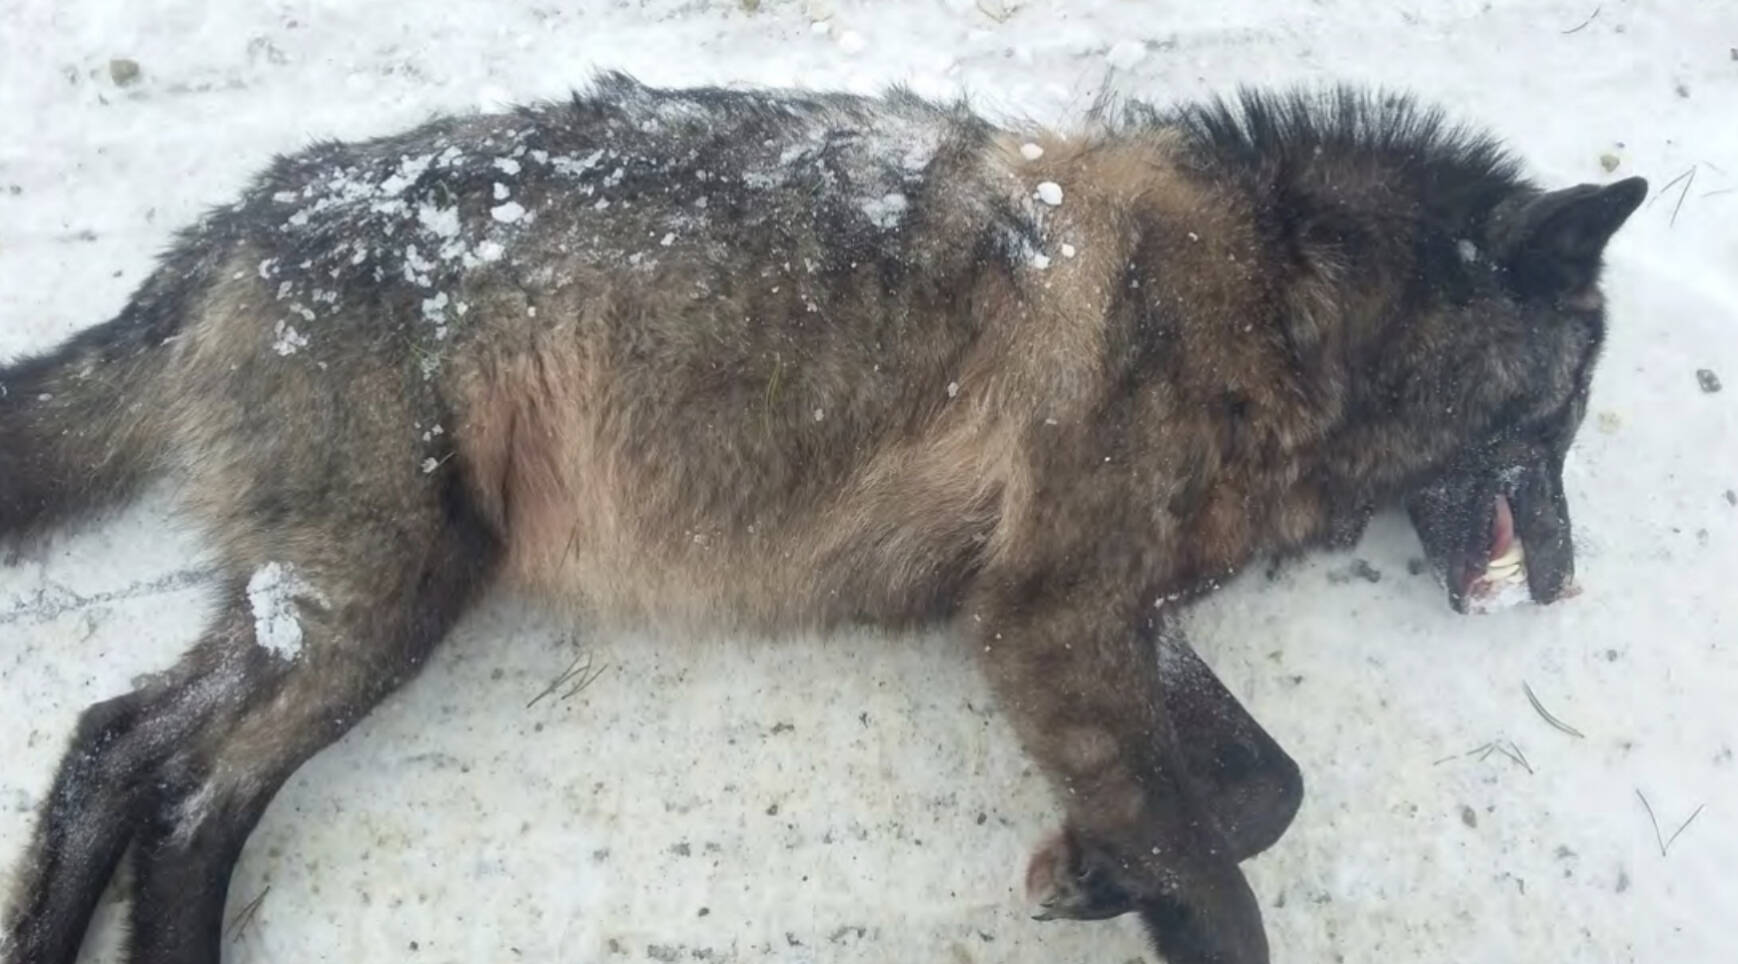 An environment charity is calling on the provincial government to rethink its wolf cull after the release of dozens of “disturbing” images. (B.C. government courtesy of Pacific Wild)